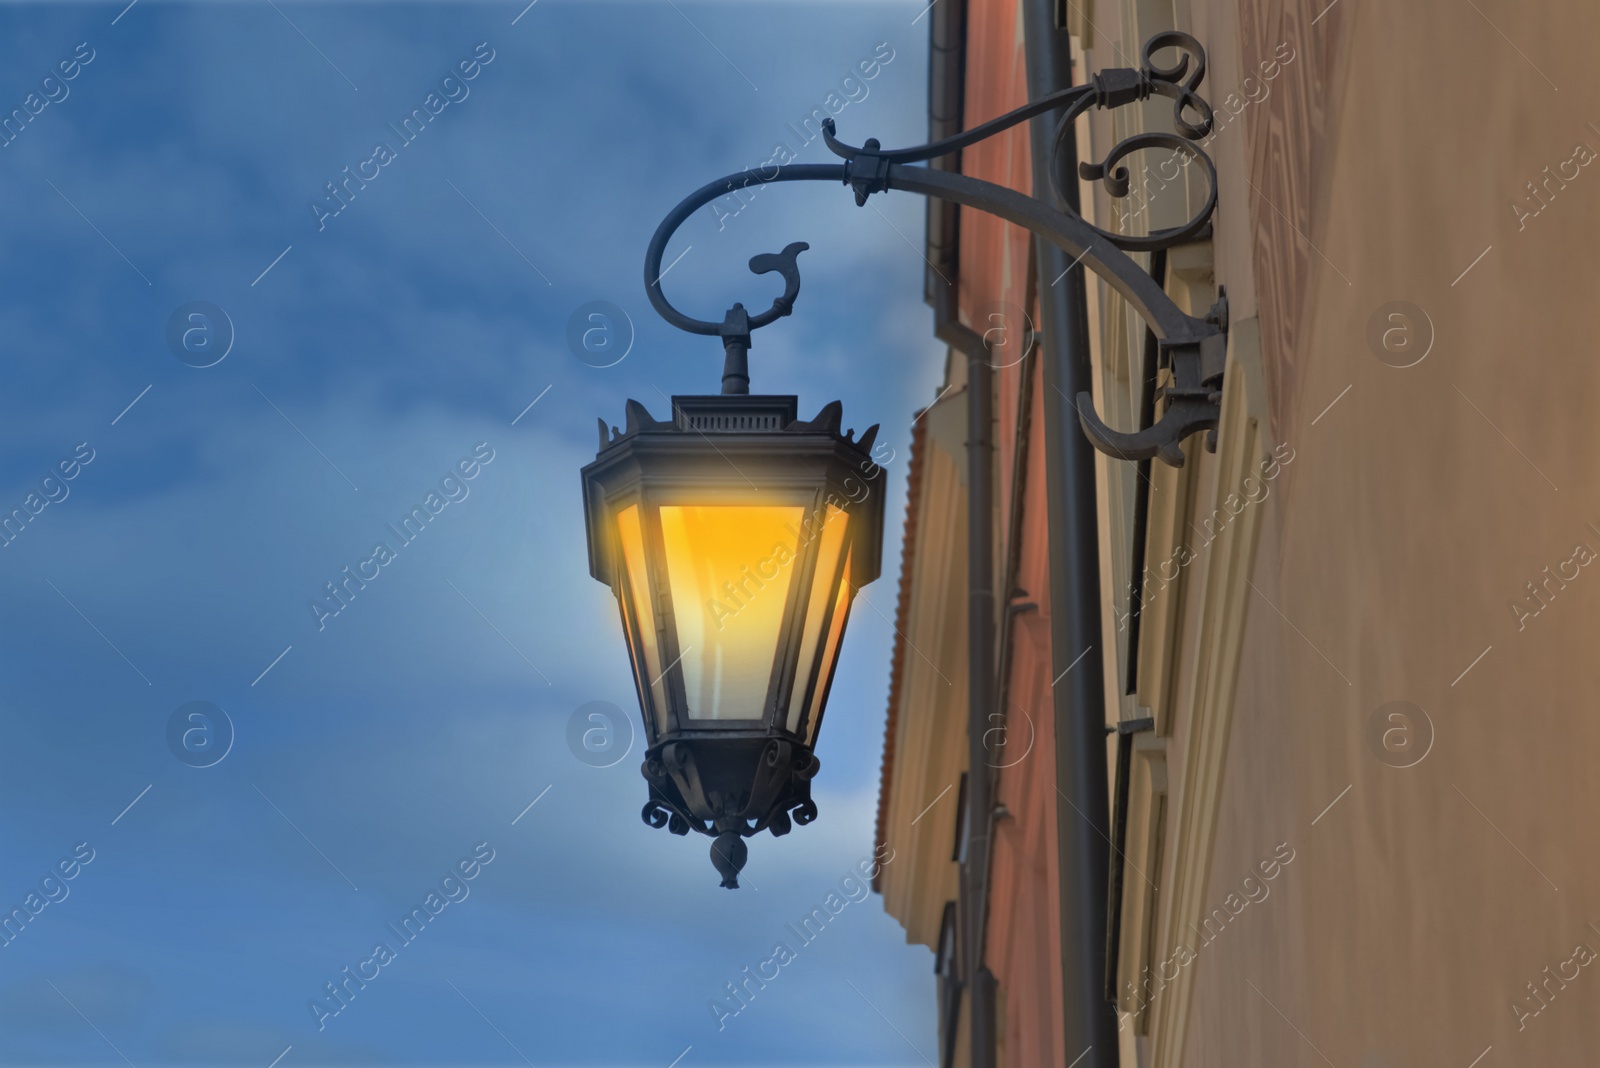 Image of Beautiful old fashioned street lamp lighting on wall of building